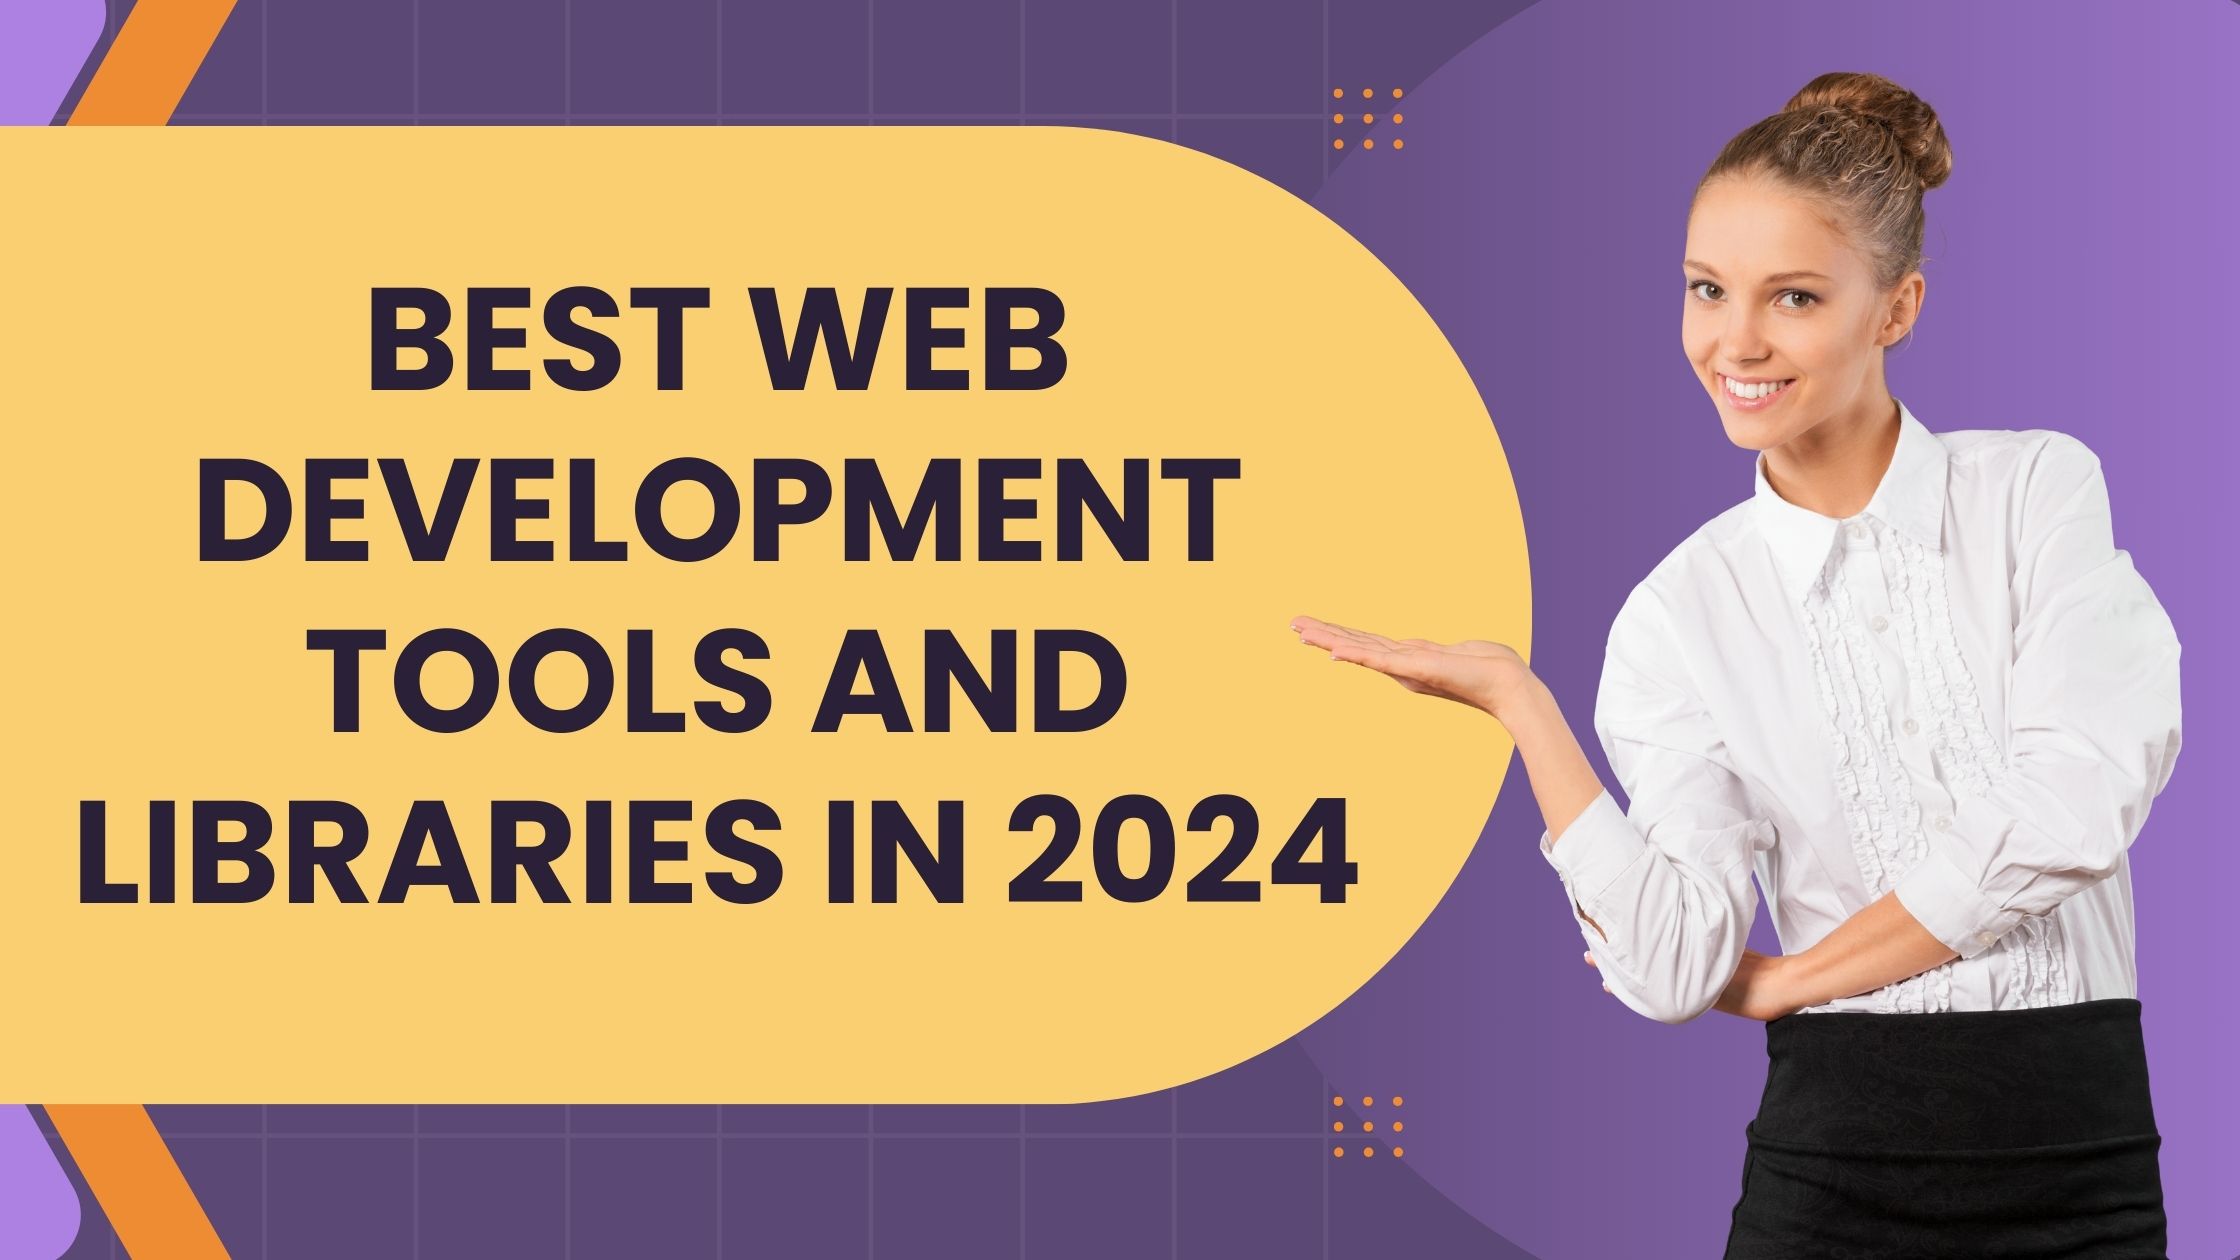 Best Web Development Tools and Libraries in 2024 - Infosky Solutions